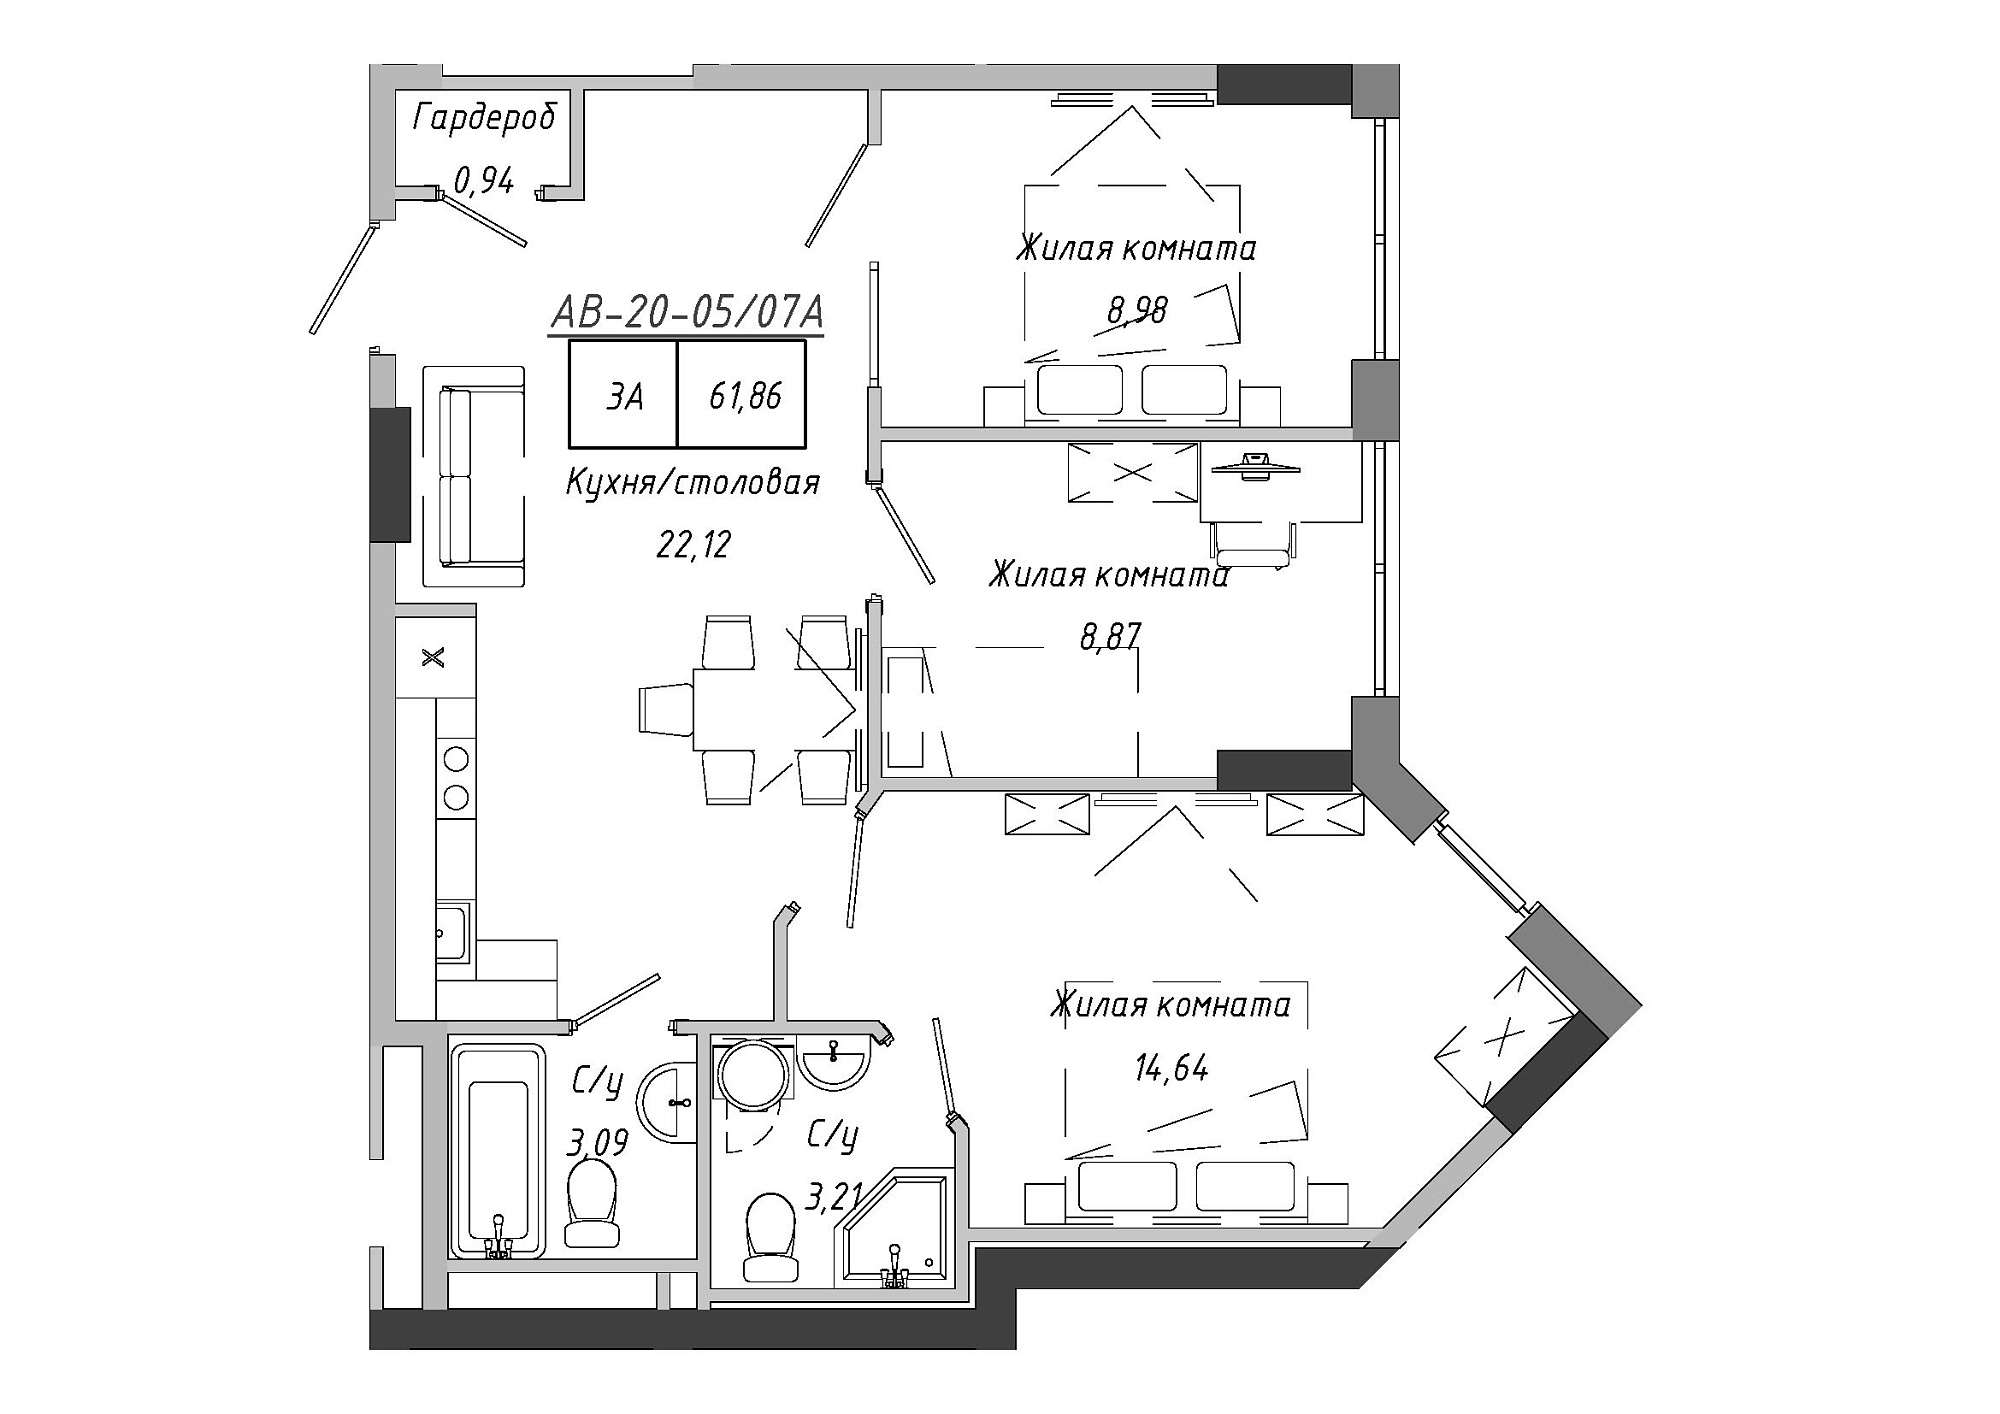 Planning 3-rm flats area 62.67m2, AB-20-05/0007а.